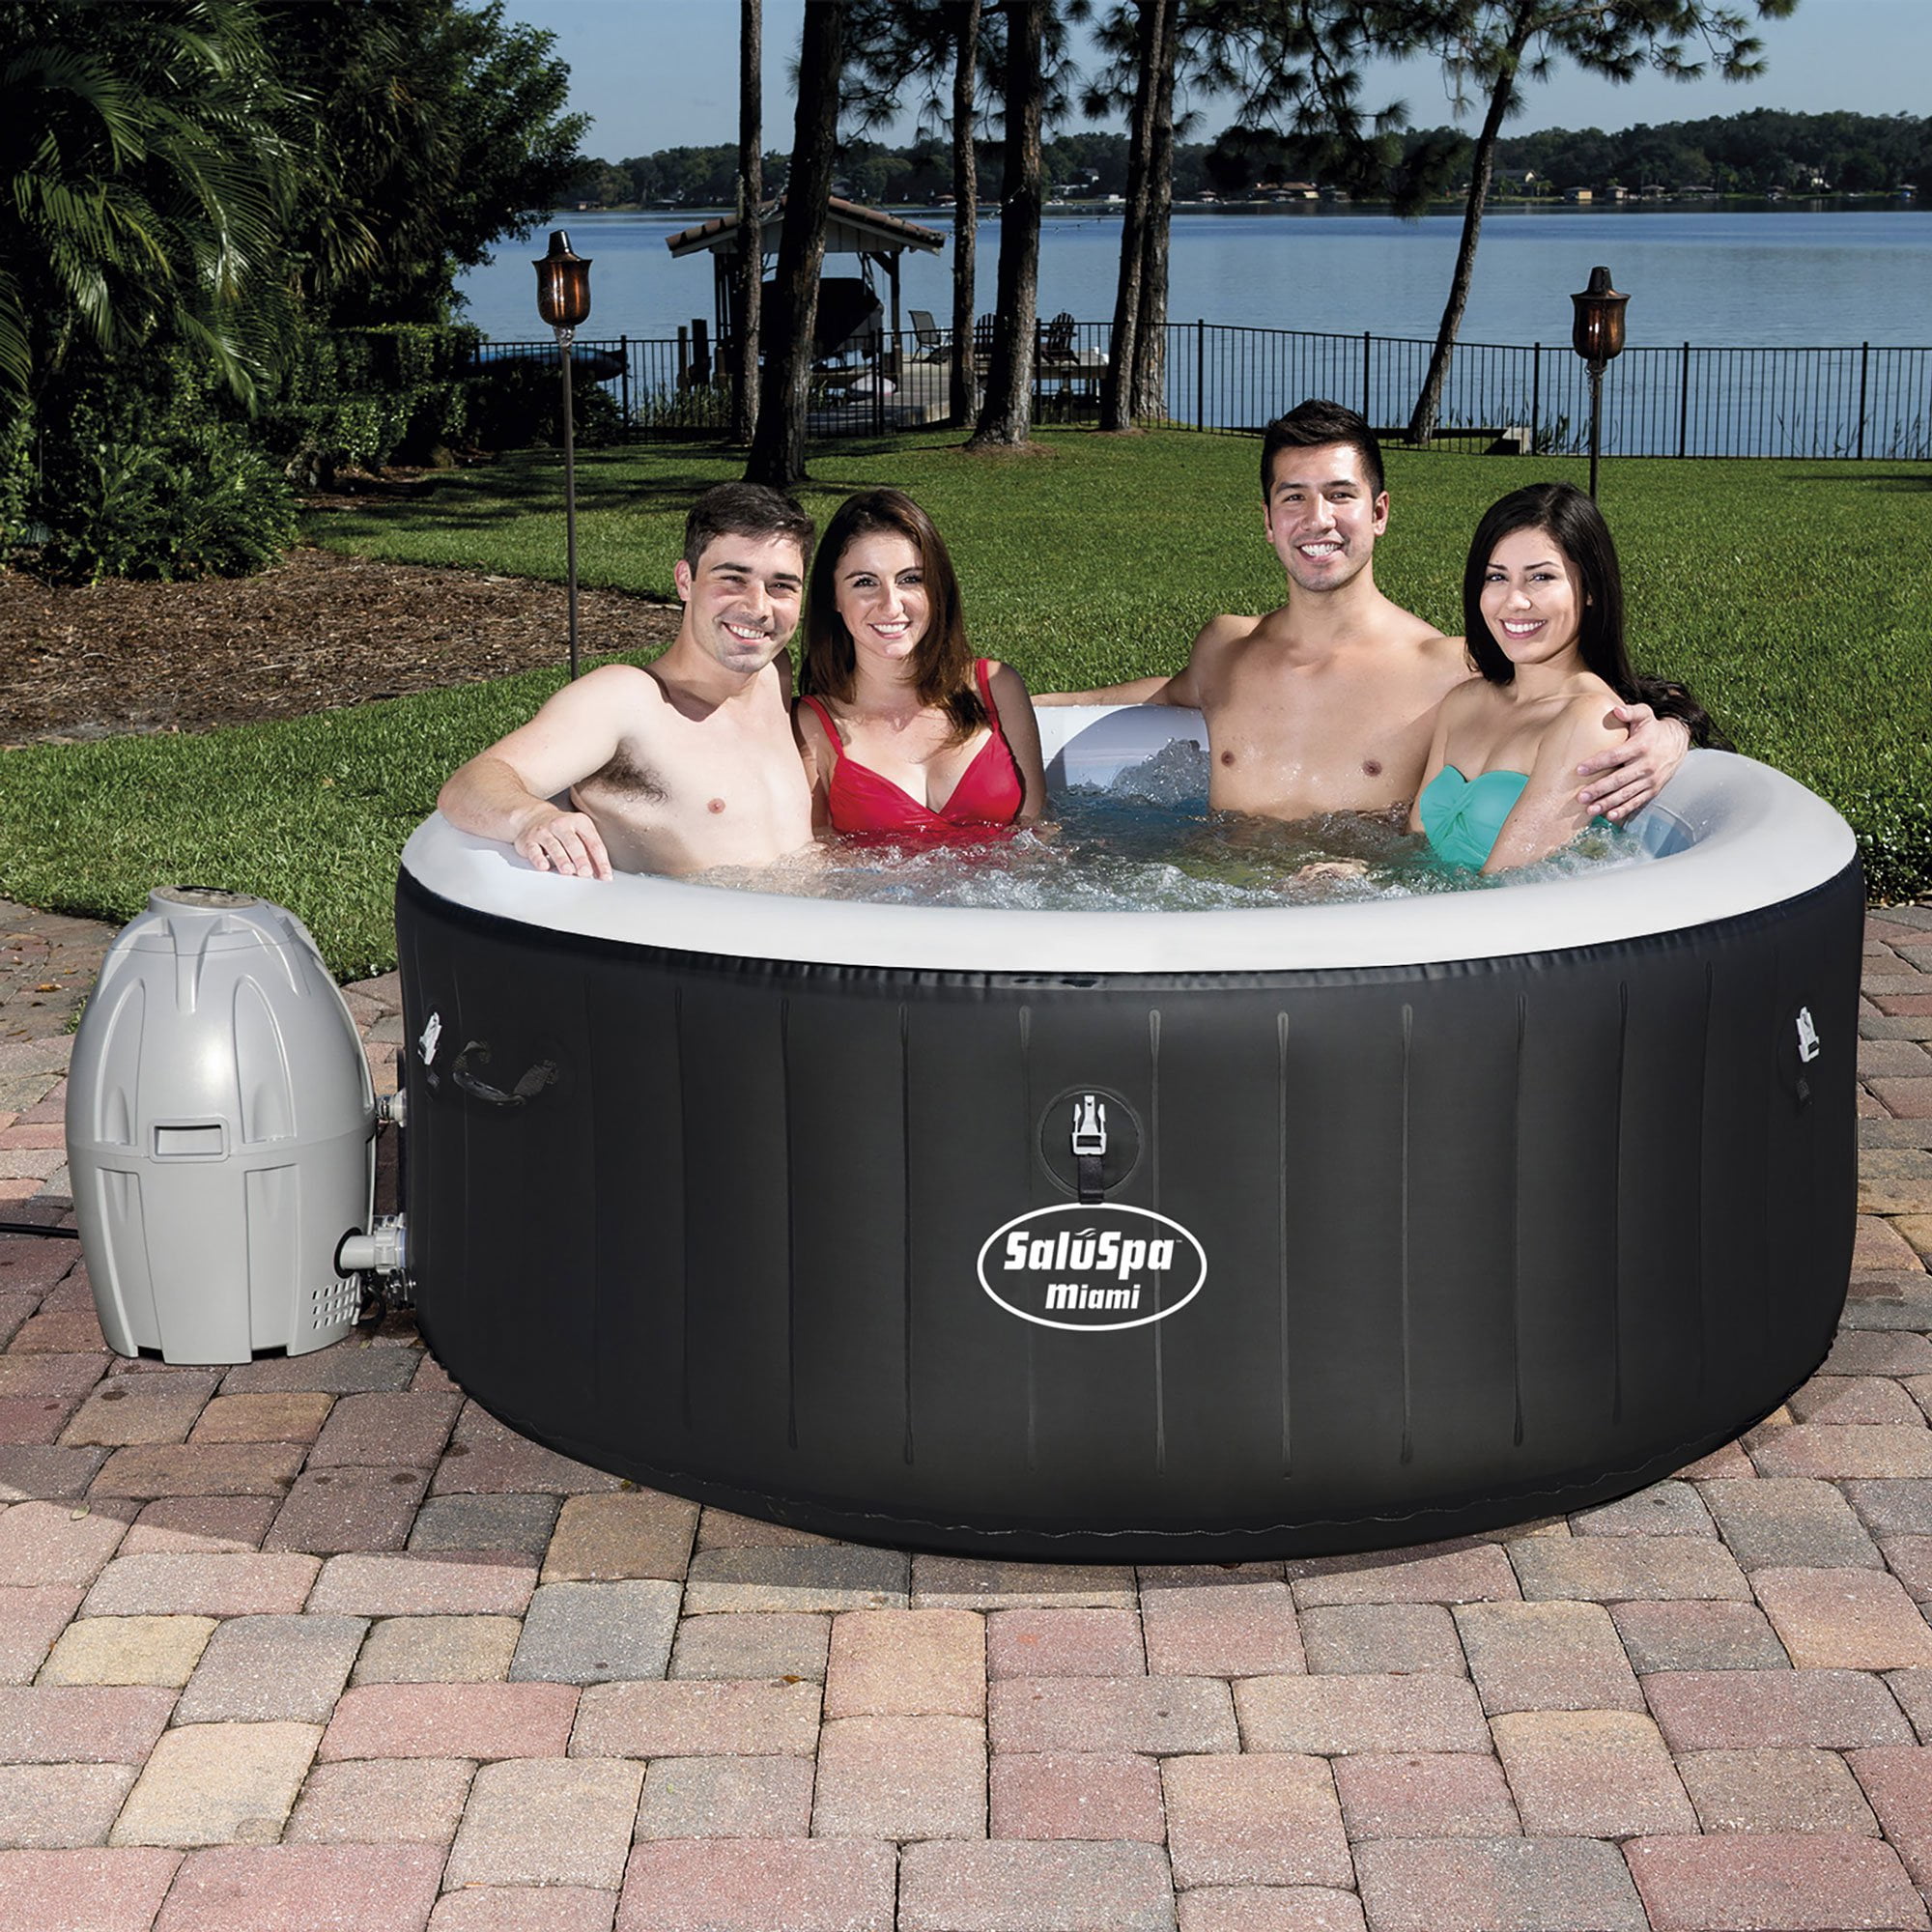 BESTWAY LAY Z SPA 2016 VEGAS INFLATABLE PORTABLE HOT TUB JACUZZI 4-6 PERSON 